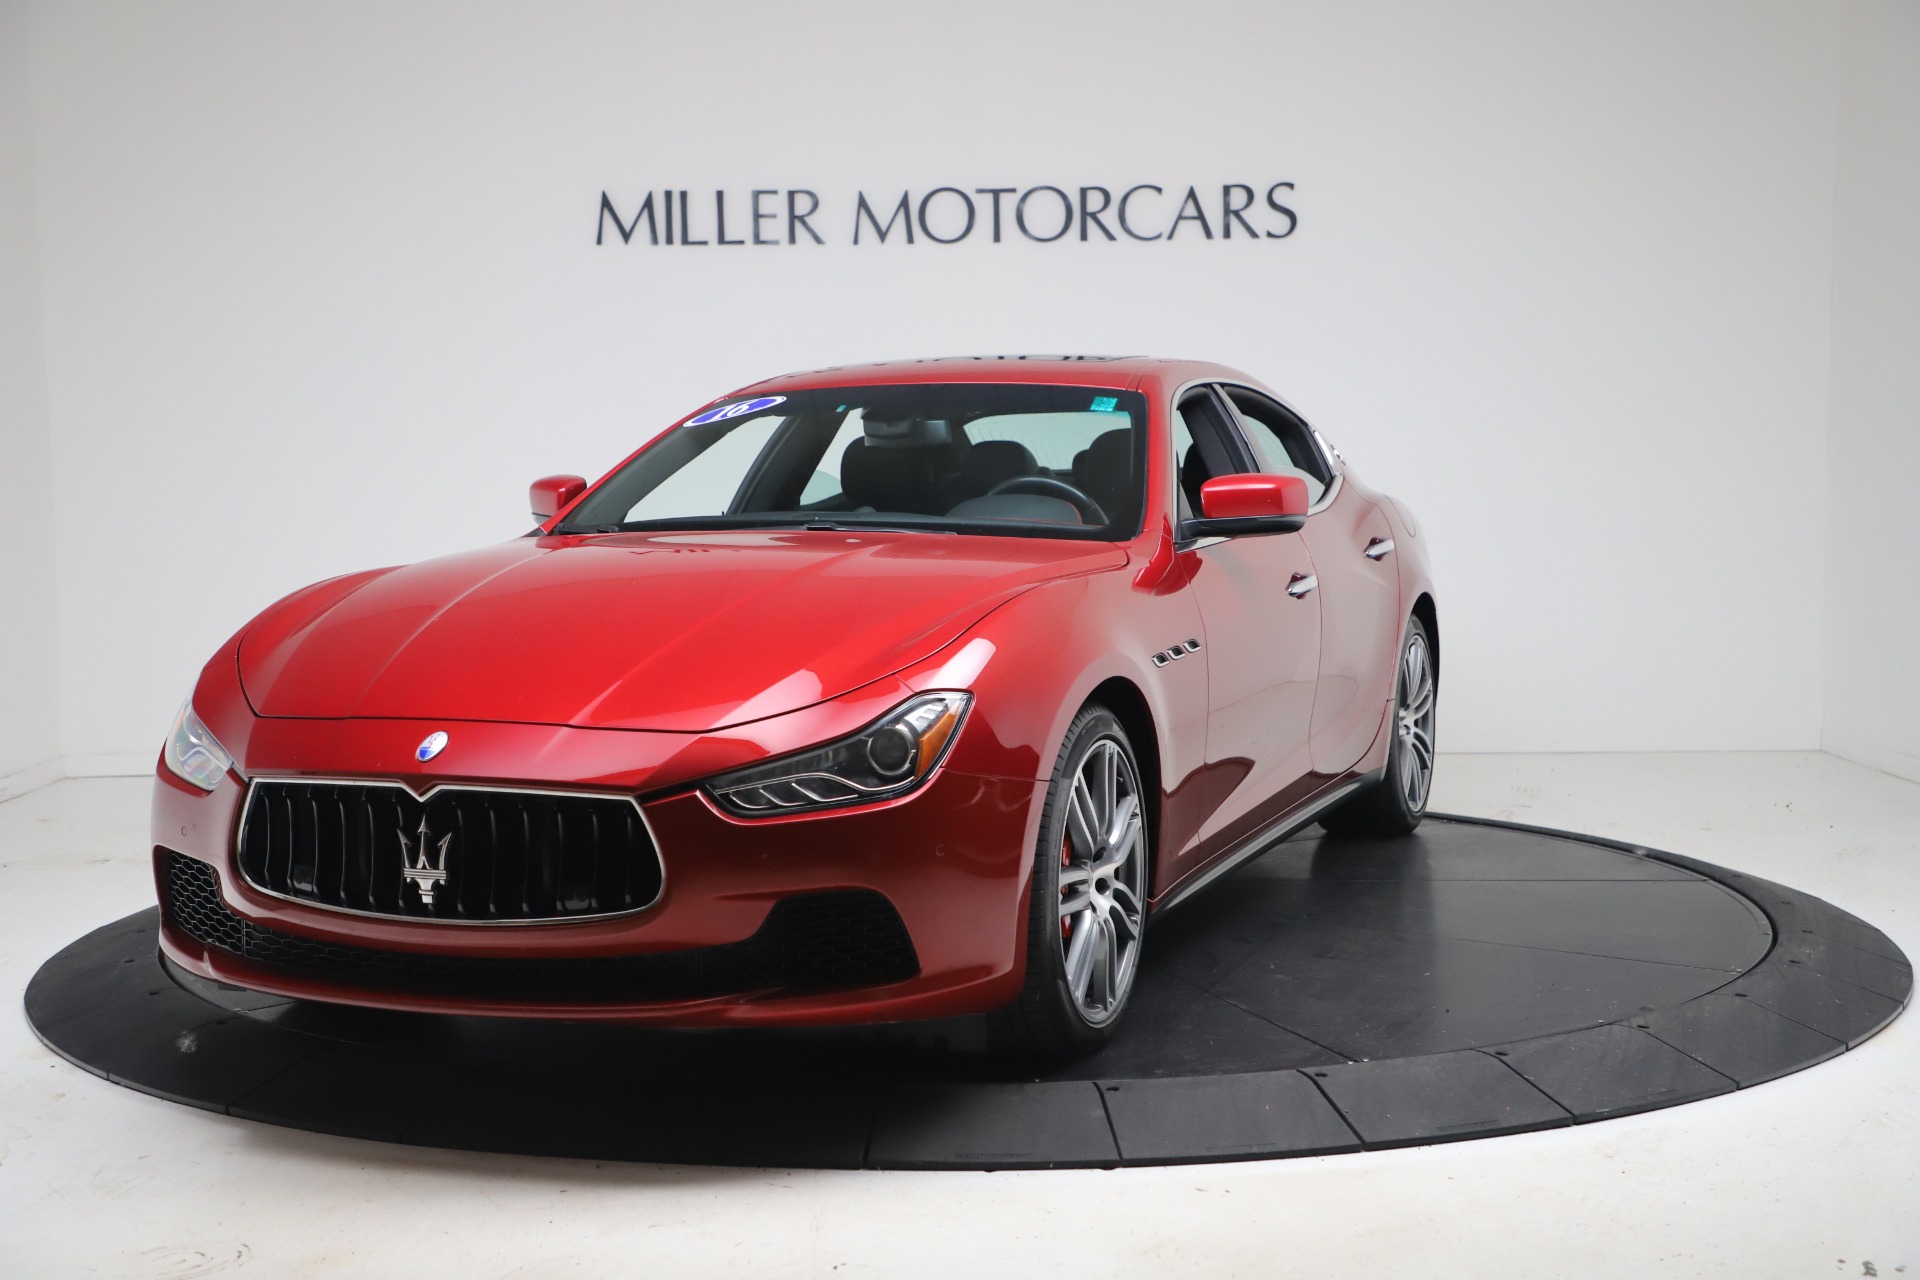 Used 2016 Maserati Ghibli S Q4 for sale $44,900 at Rolls-Royce Motor Cars Greenwich in Greenwich CT 06830 1